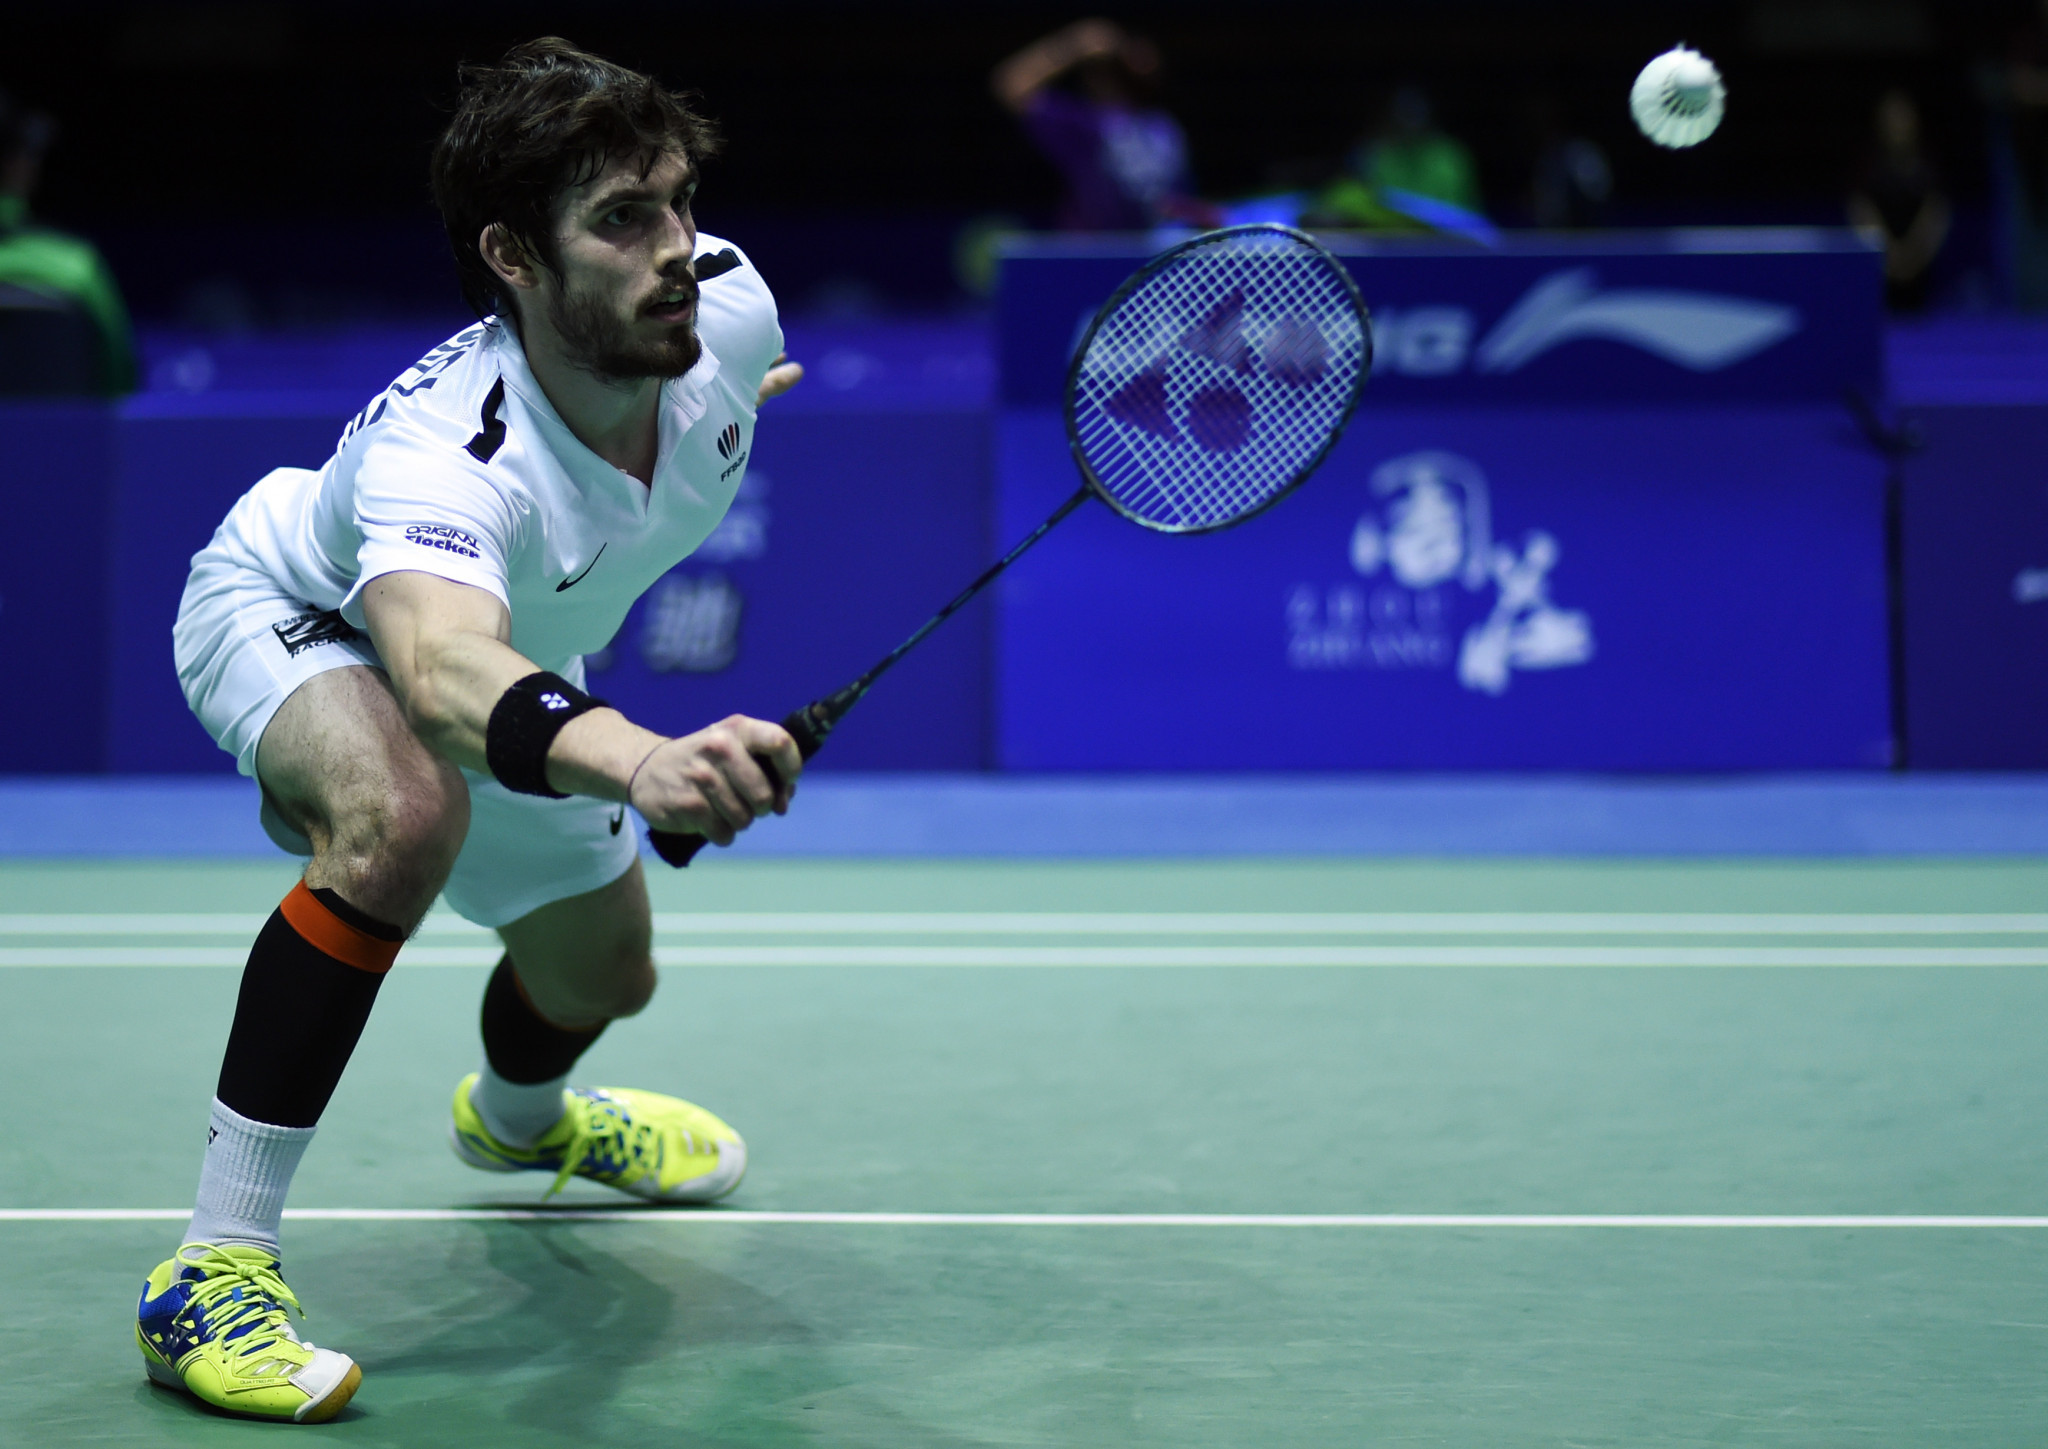 Home pair come through men's singles qualifying at BWF French Open